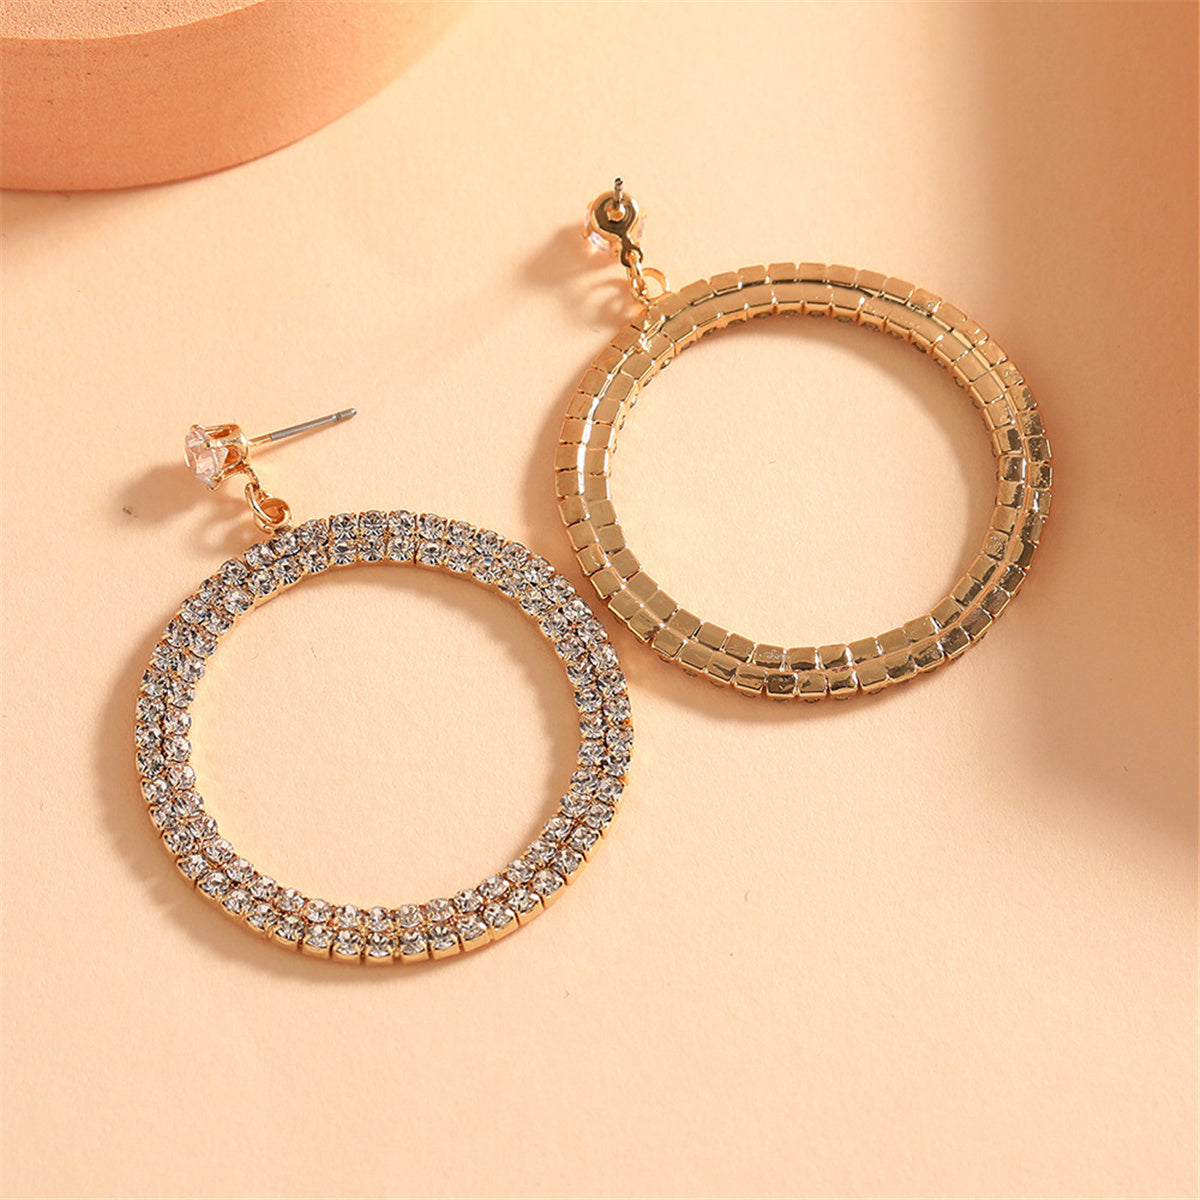 Cubic Zirconia & 18K Gold-Plated Pavé Circle Drop Earrings